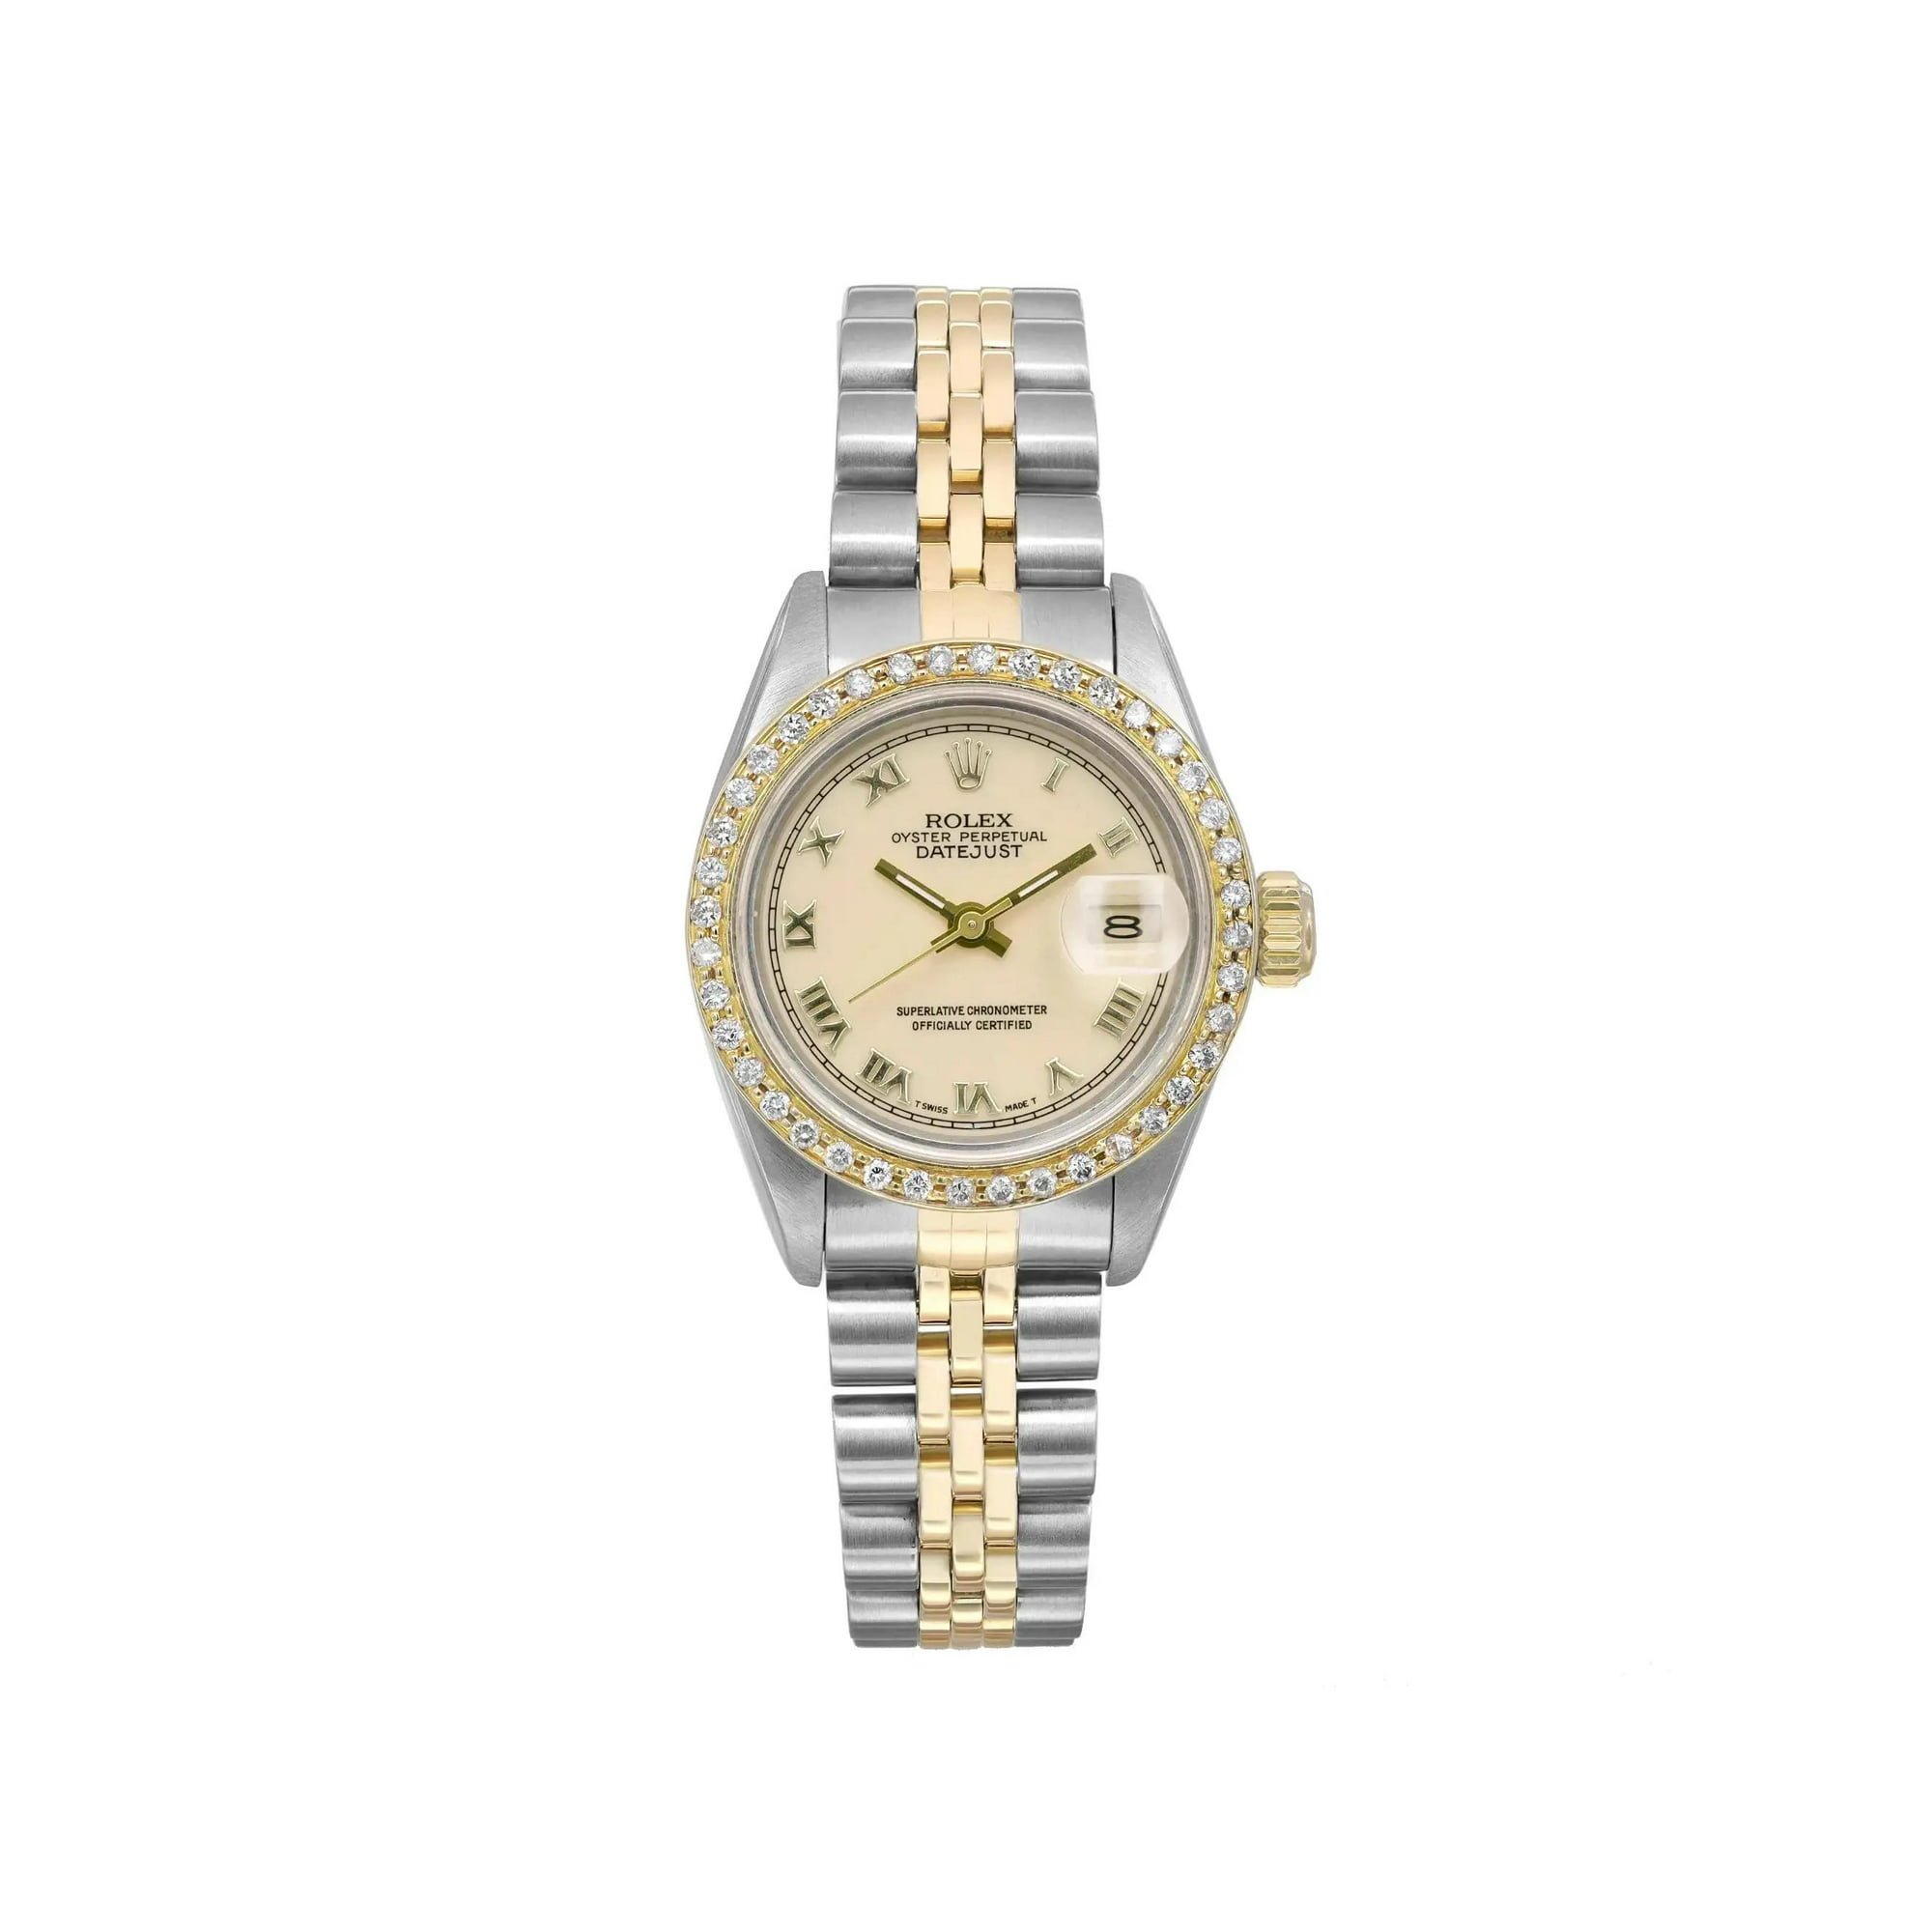 Rolex 26mm Datejust 18kt Gold Black Color Dial with Diamond Accent